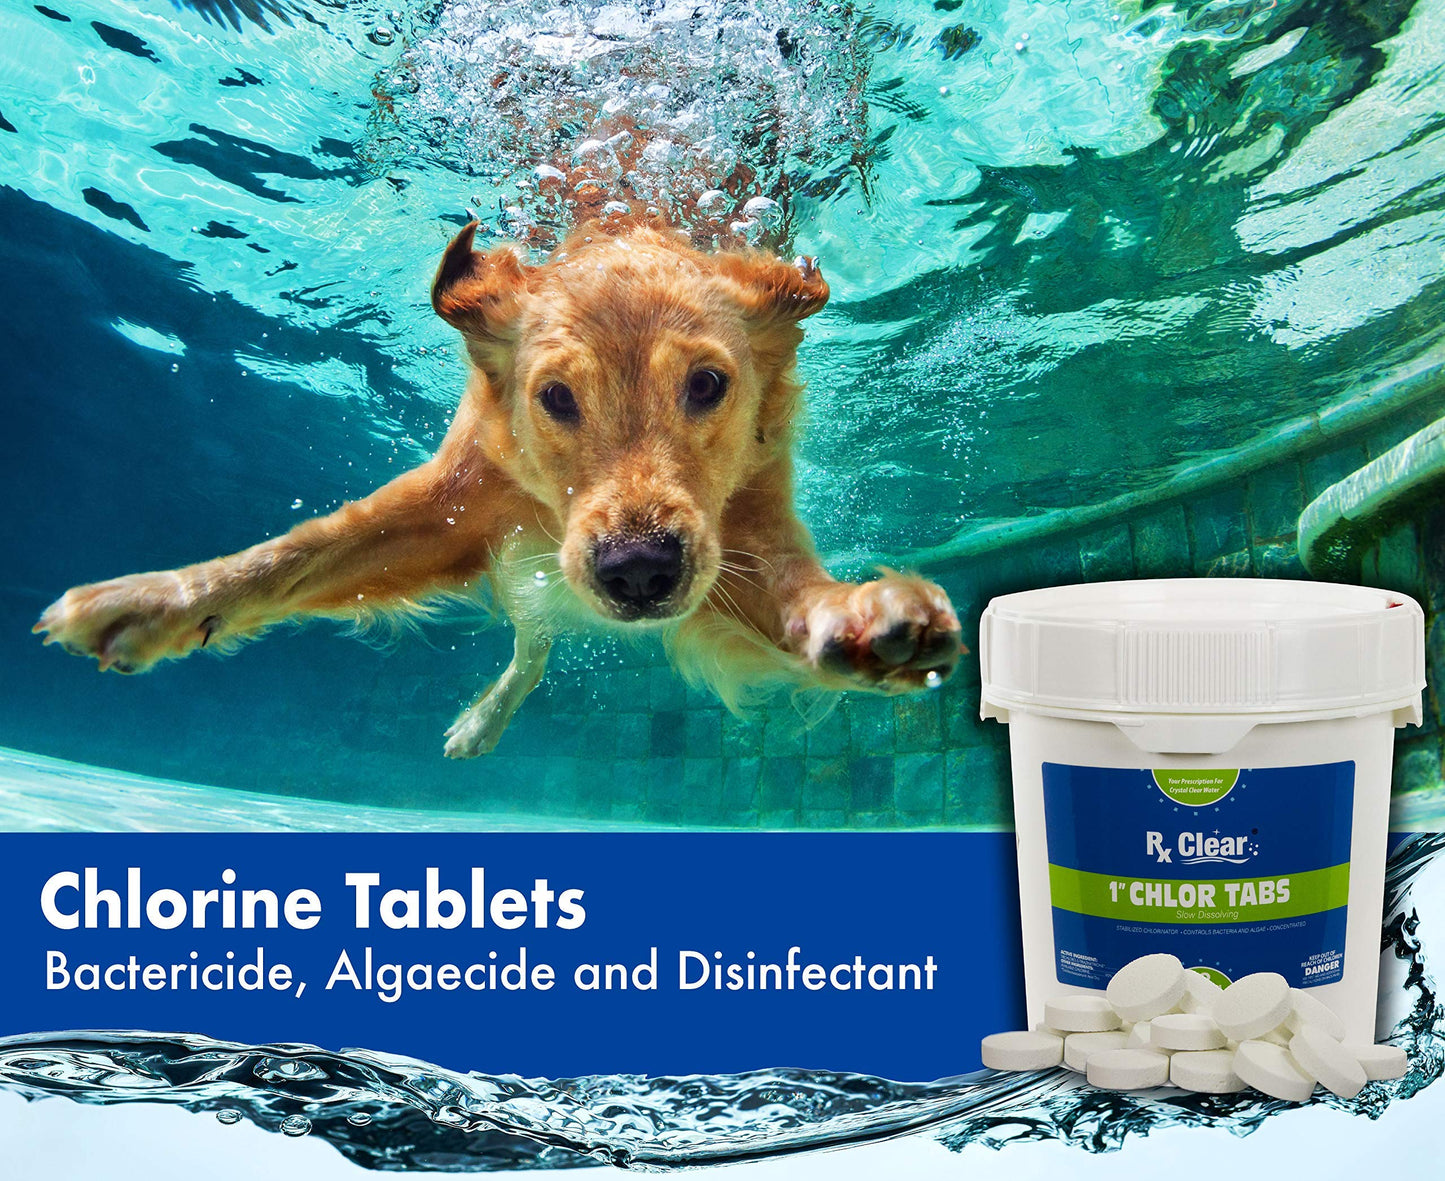 Rx Clear 1-Inch Stabilized Chlorine Tablets | Use As Bactericide, Algaecide, and Disinfectant in Swimming Pools and Spas | Slow Dissolving and UV Protected | 8 Lbs